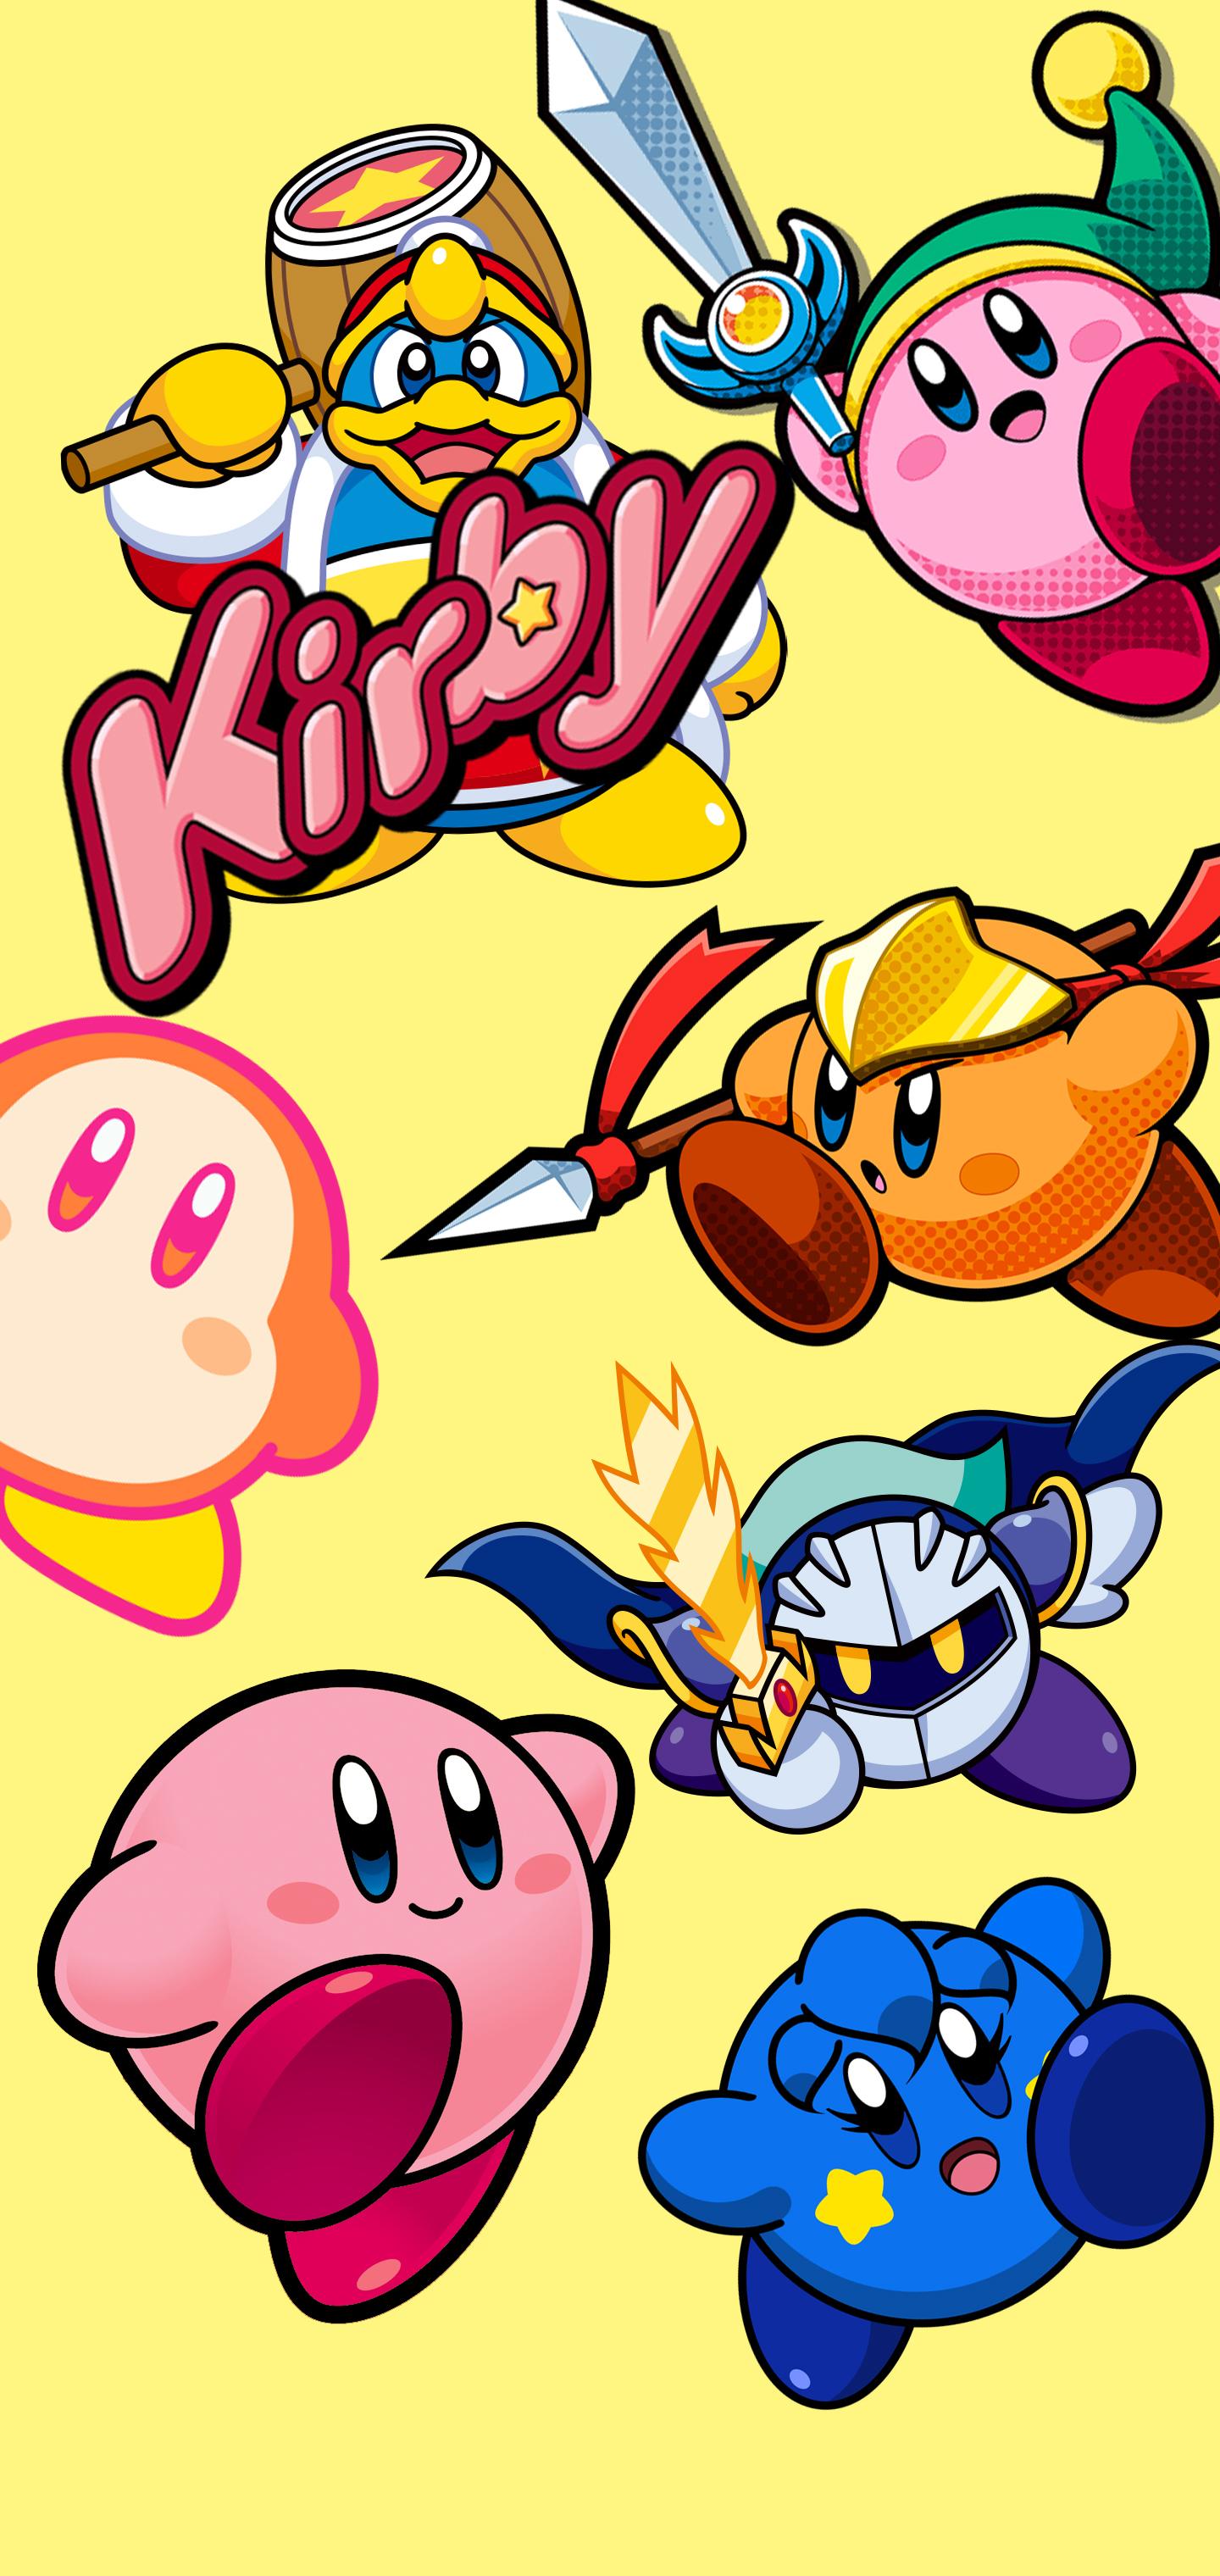 Kirby wallpaper I made, I think it's pretty good for my first one. Lemme know what you guys think!